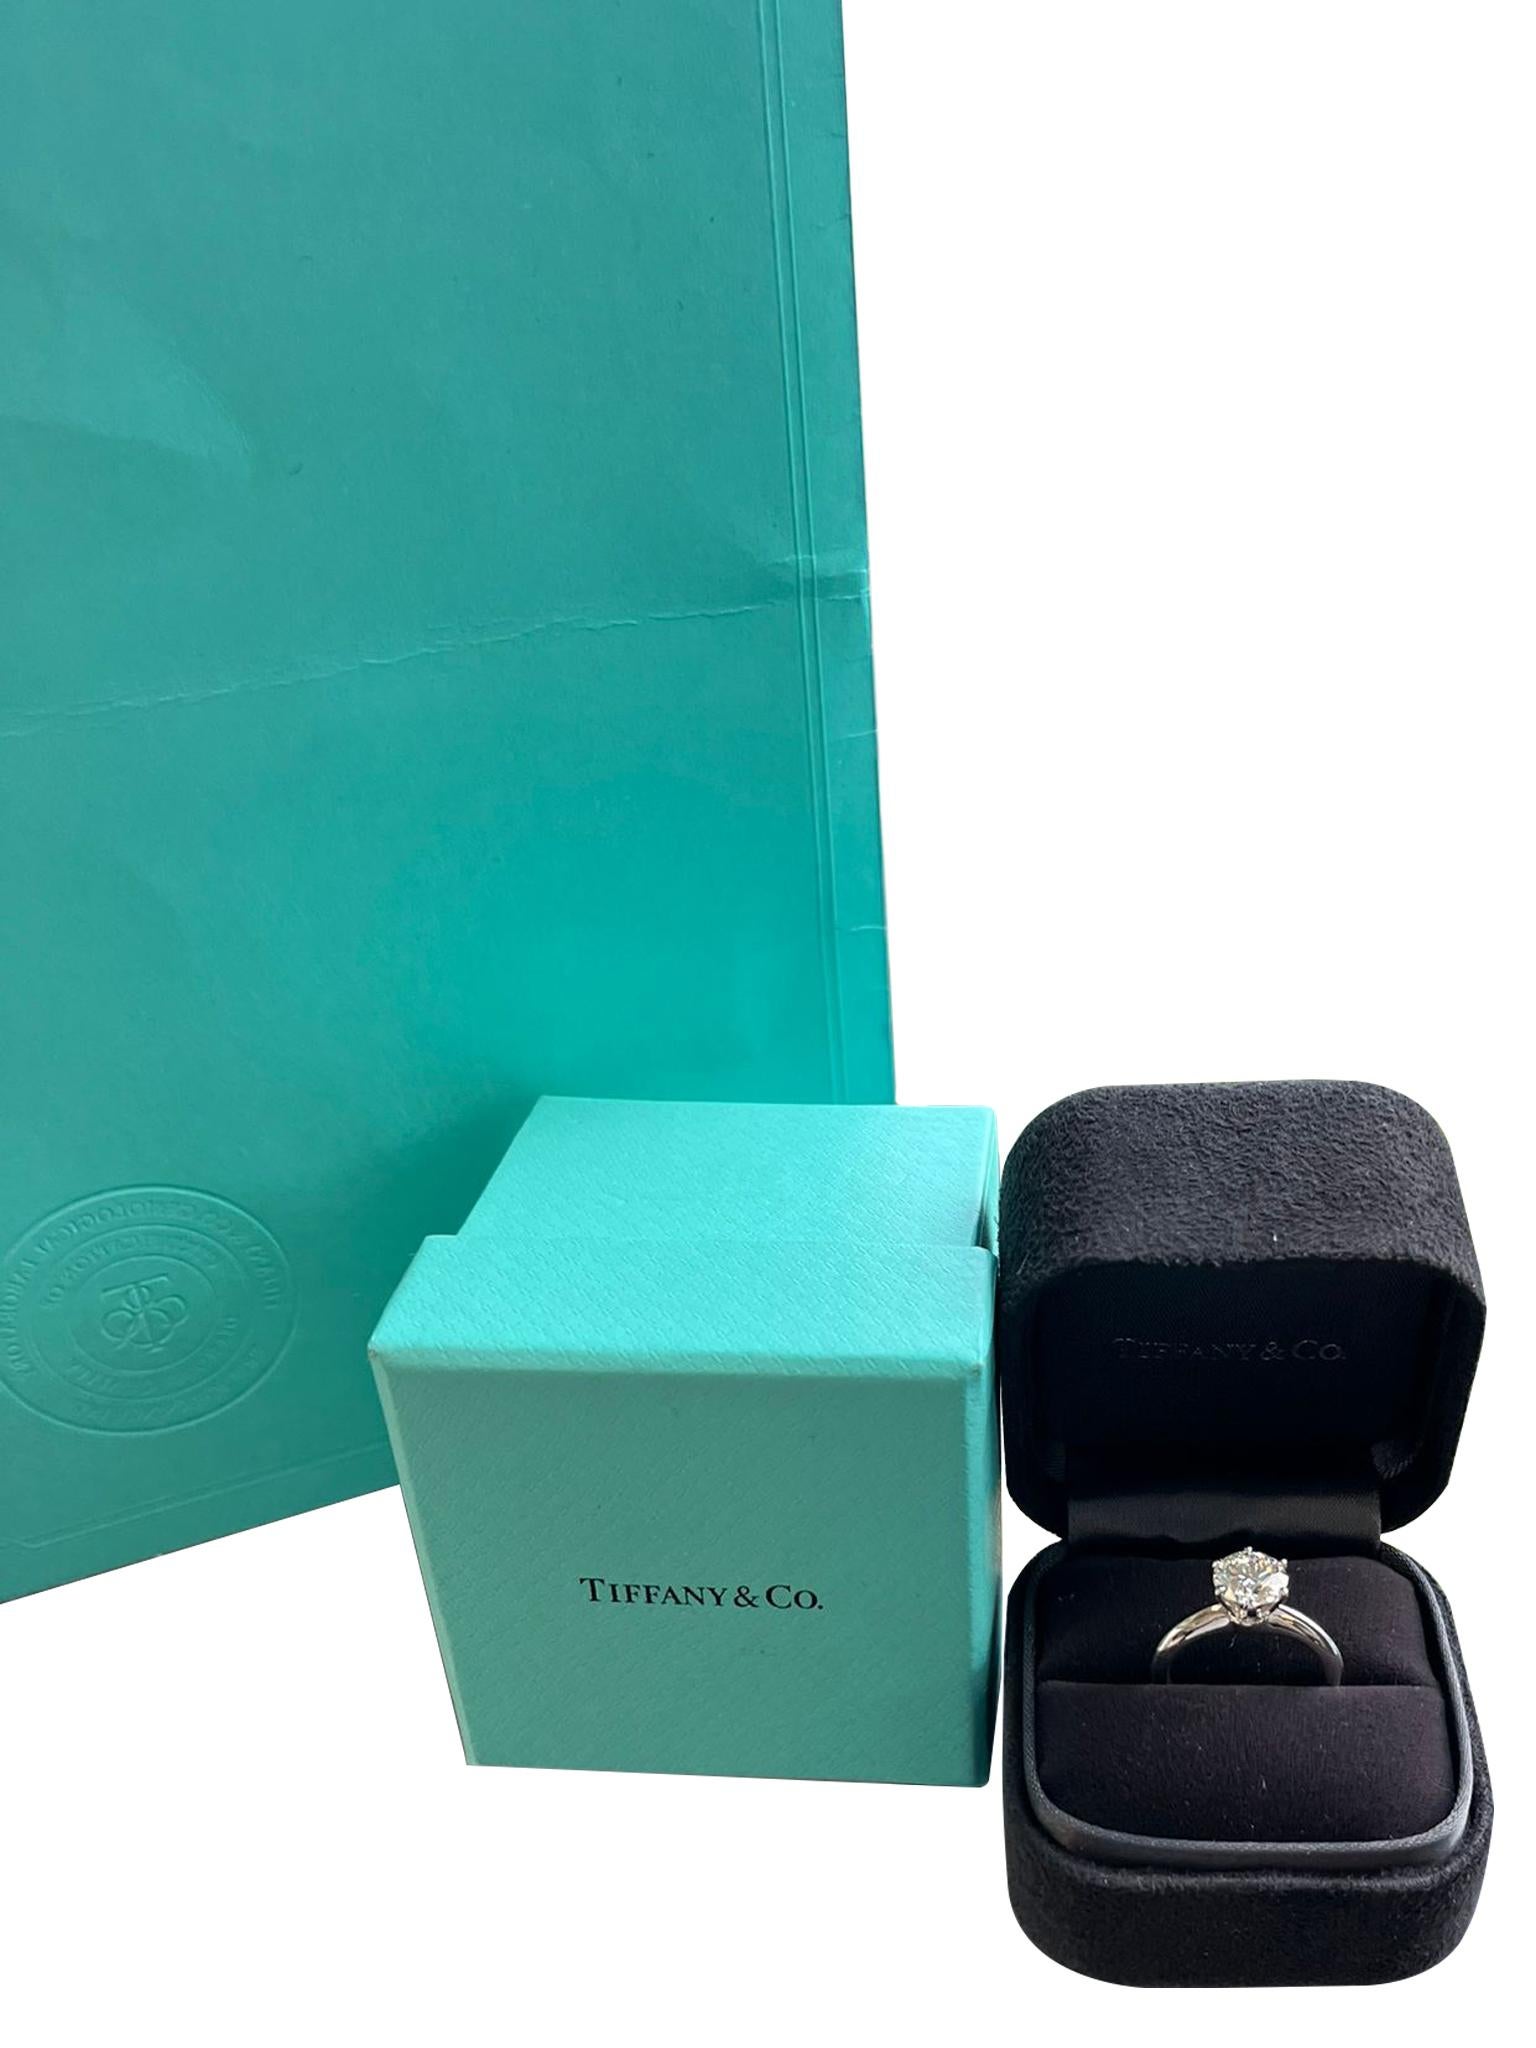 Tiffany & Co GIA 1.53 Carat Natural Cut Round Diamond Platinum Engagement Ring In Excellent Condition For Sale In Aventura, FL